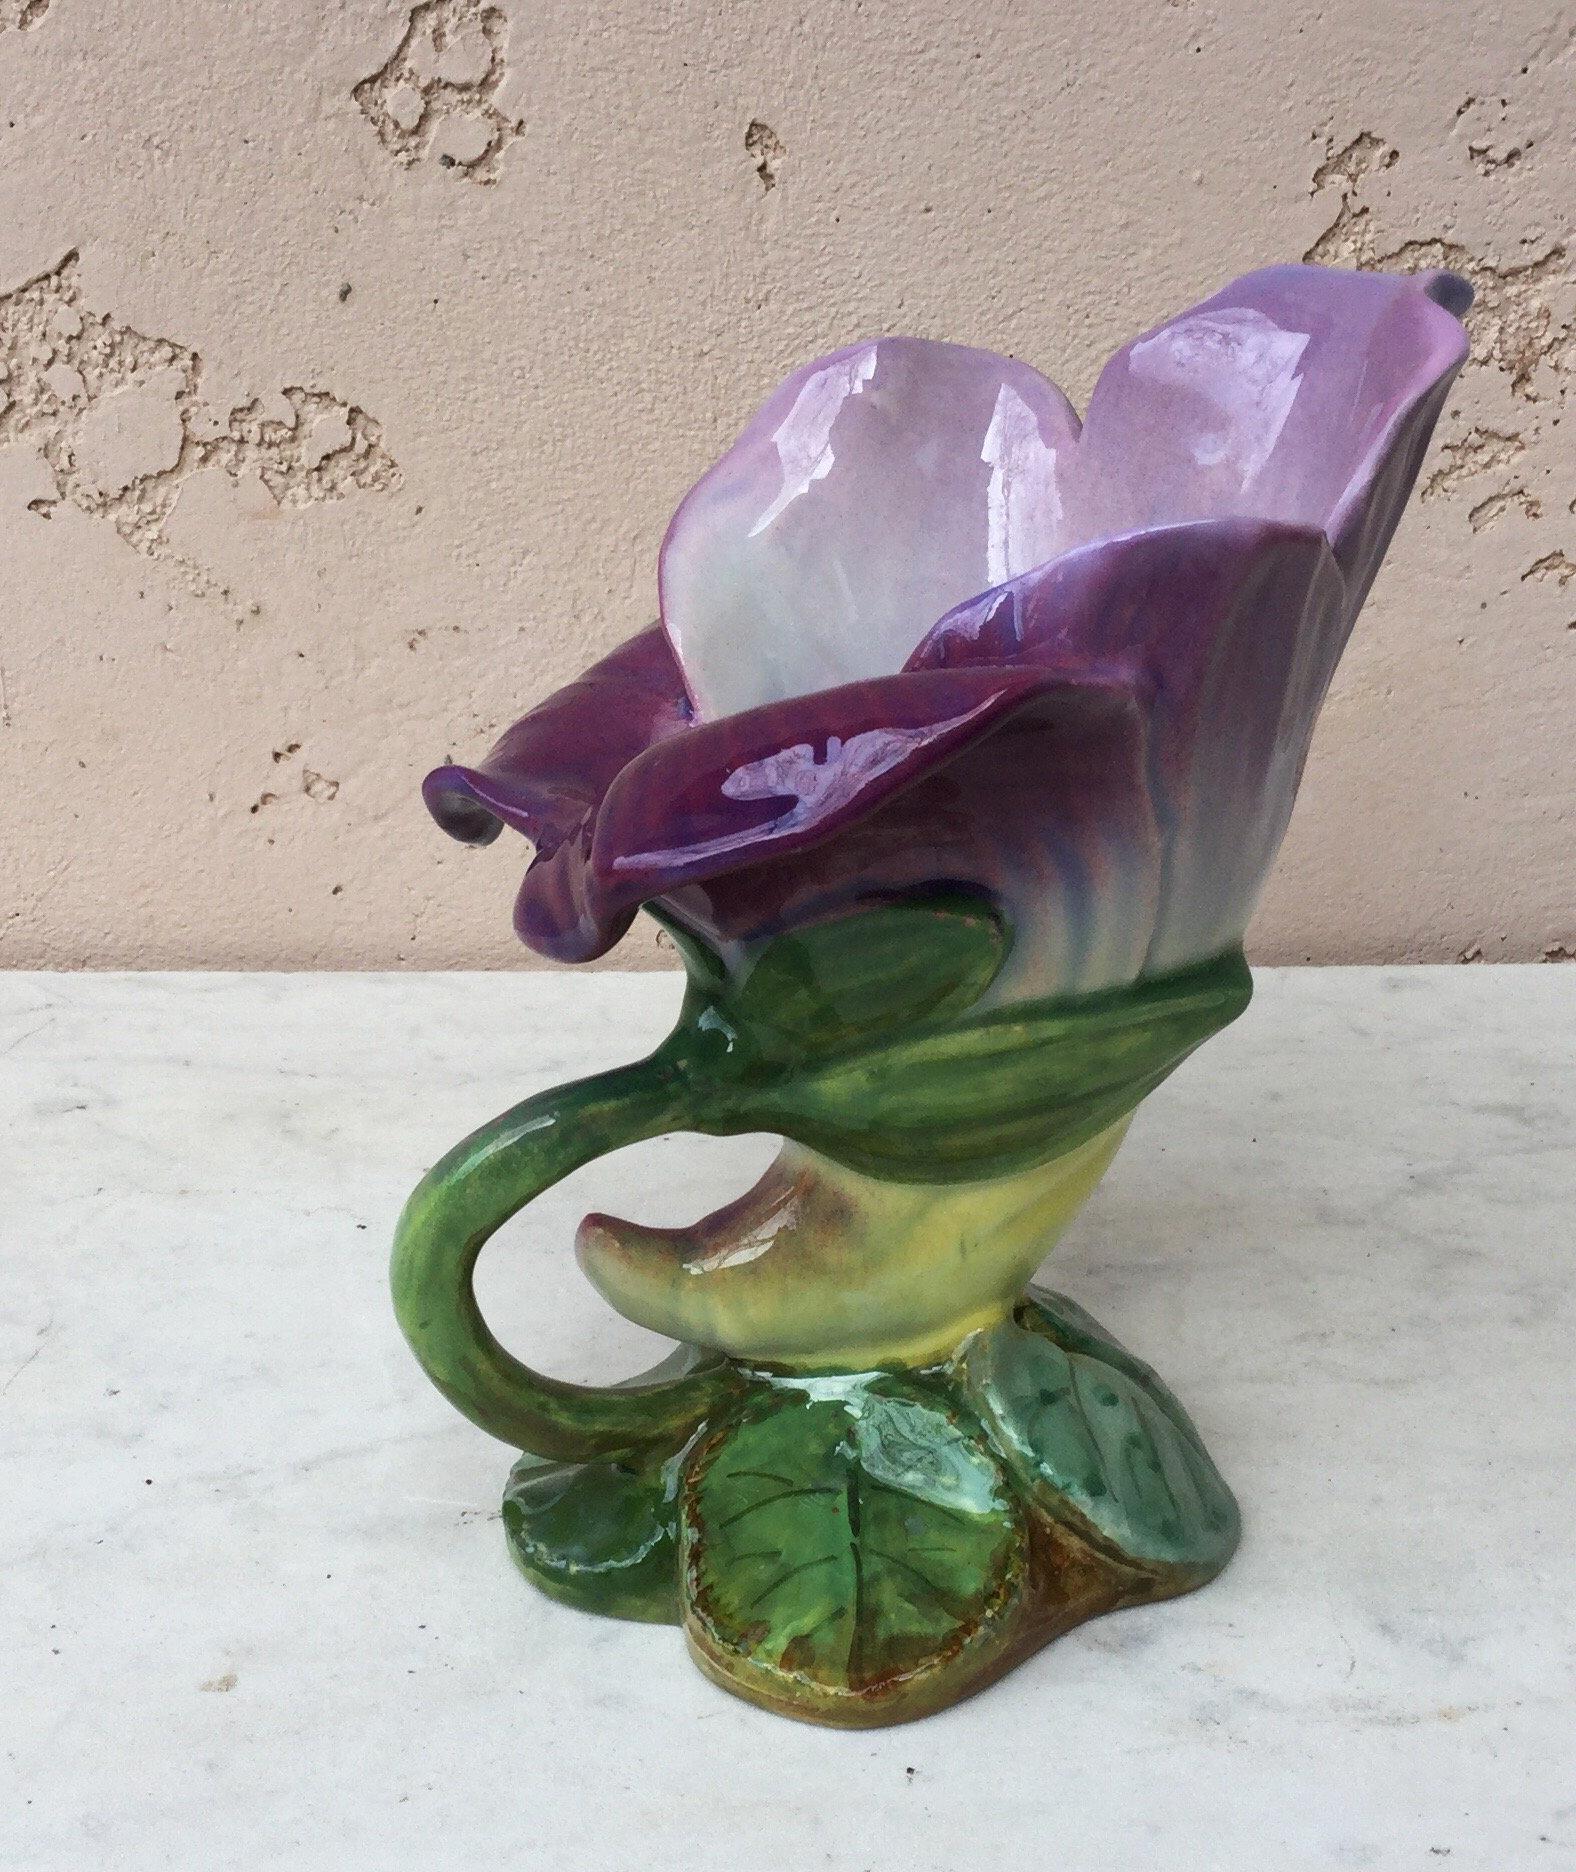 Majolica purple flower vase signed Jerome Massier Fils Vallauris, circa 1890.
The Massier family are known for the quality of their unique enamels and paintings. They produced an incredible whole range of flowers like iris, roses, daisies, wild